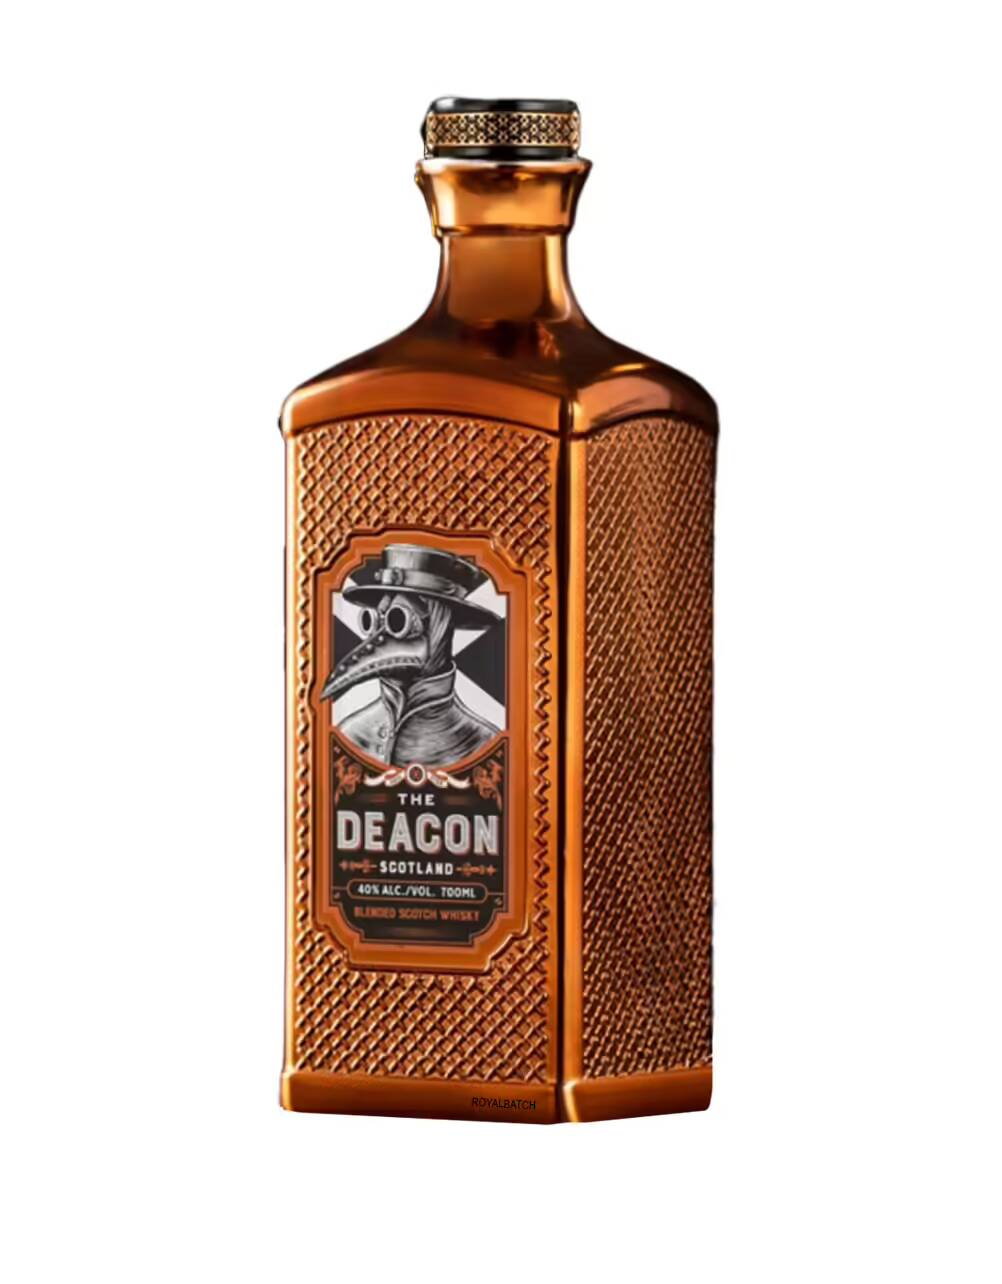 The Deacon Scotland Blended Scotch Whisky